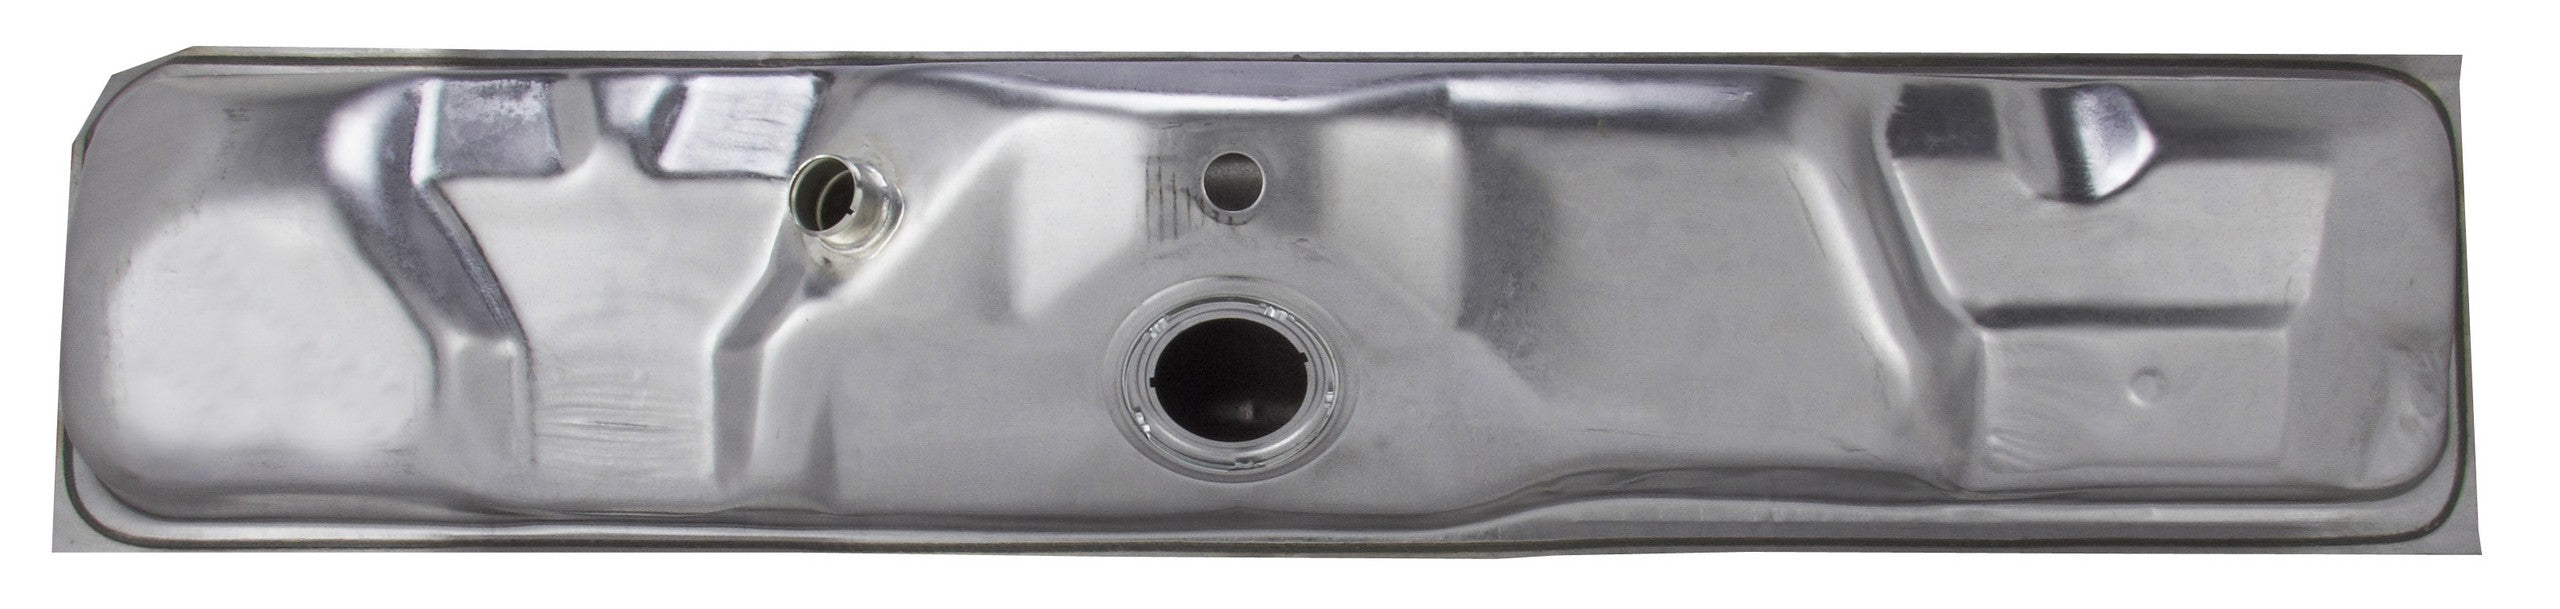 Fuel Tank for Ford F-150 1996 1995 1994 1993 1992 1991 1990 - Spectra F6C